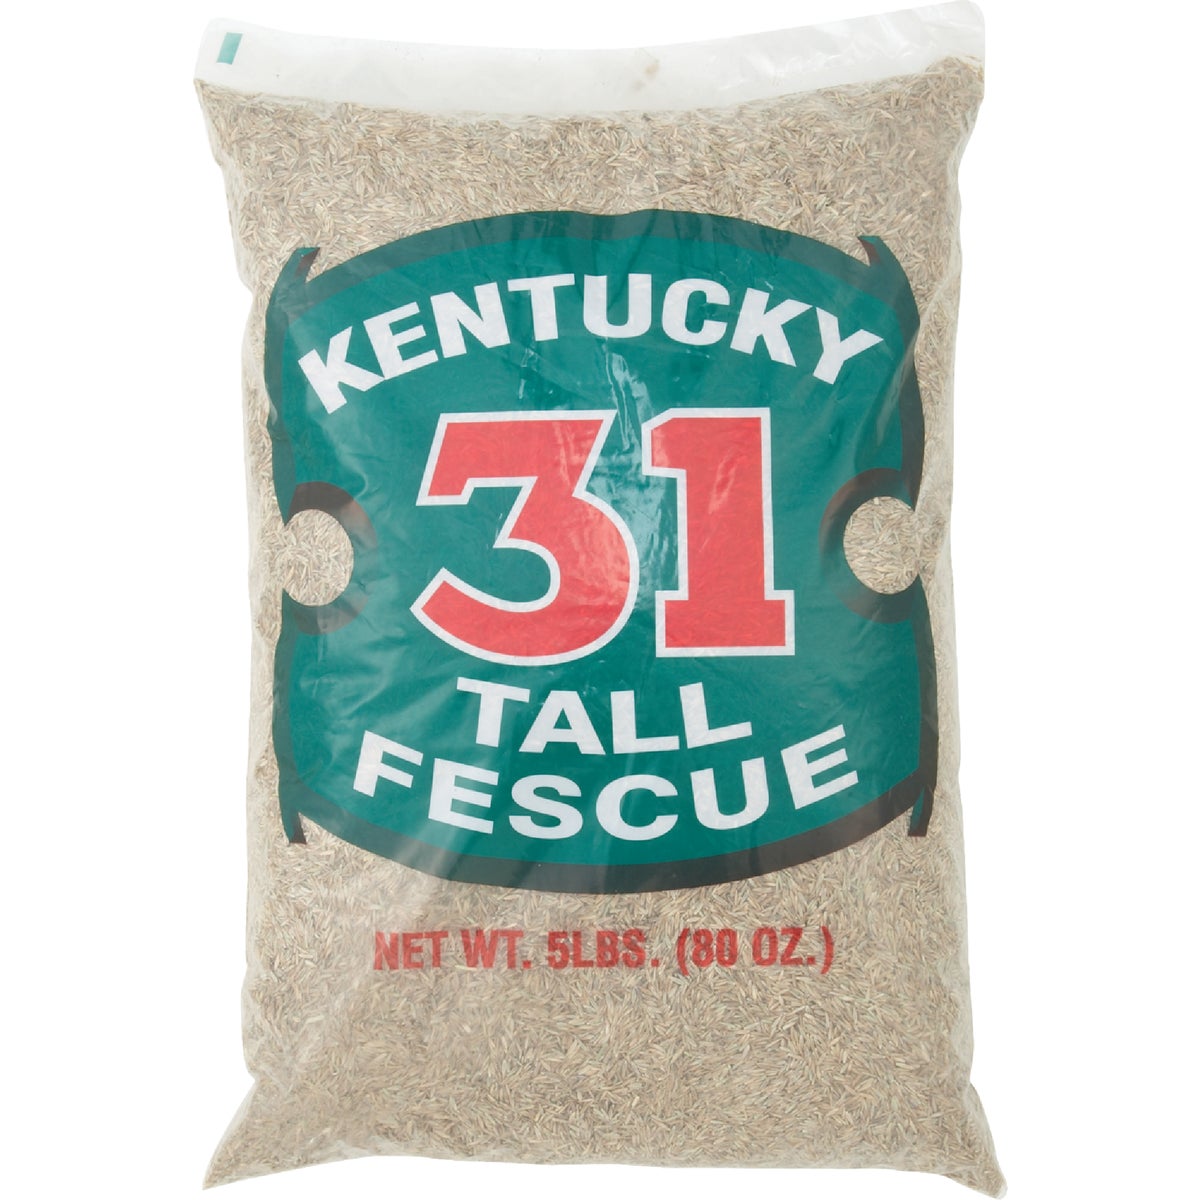 Item 763136, Ideal seed for turf and lawn grass applications.